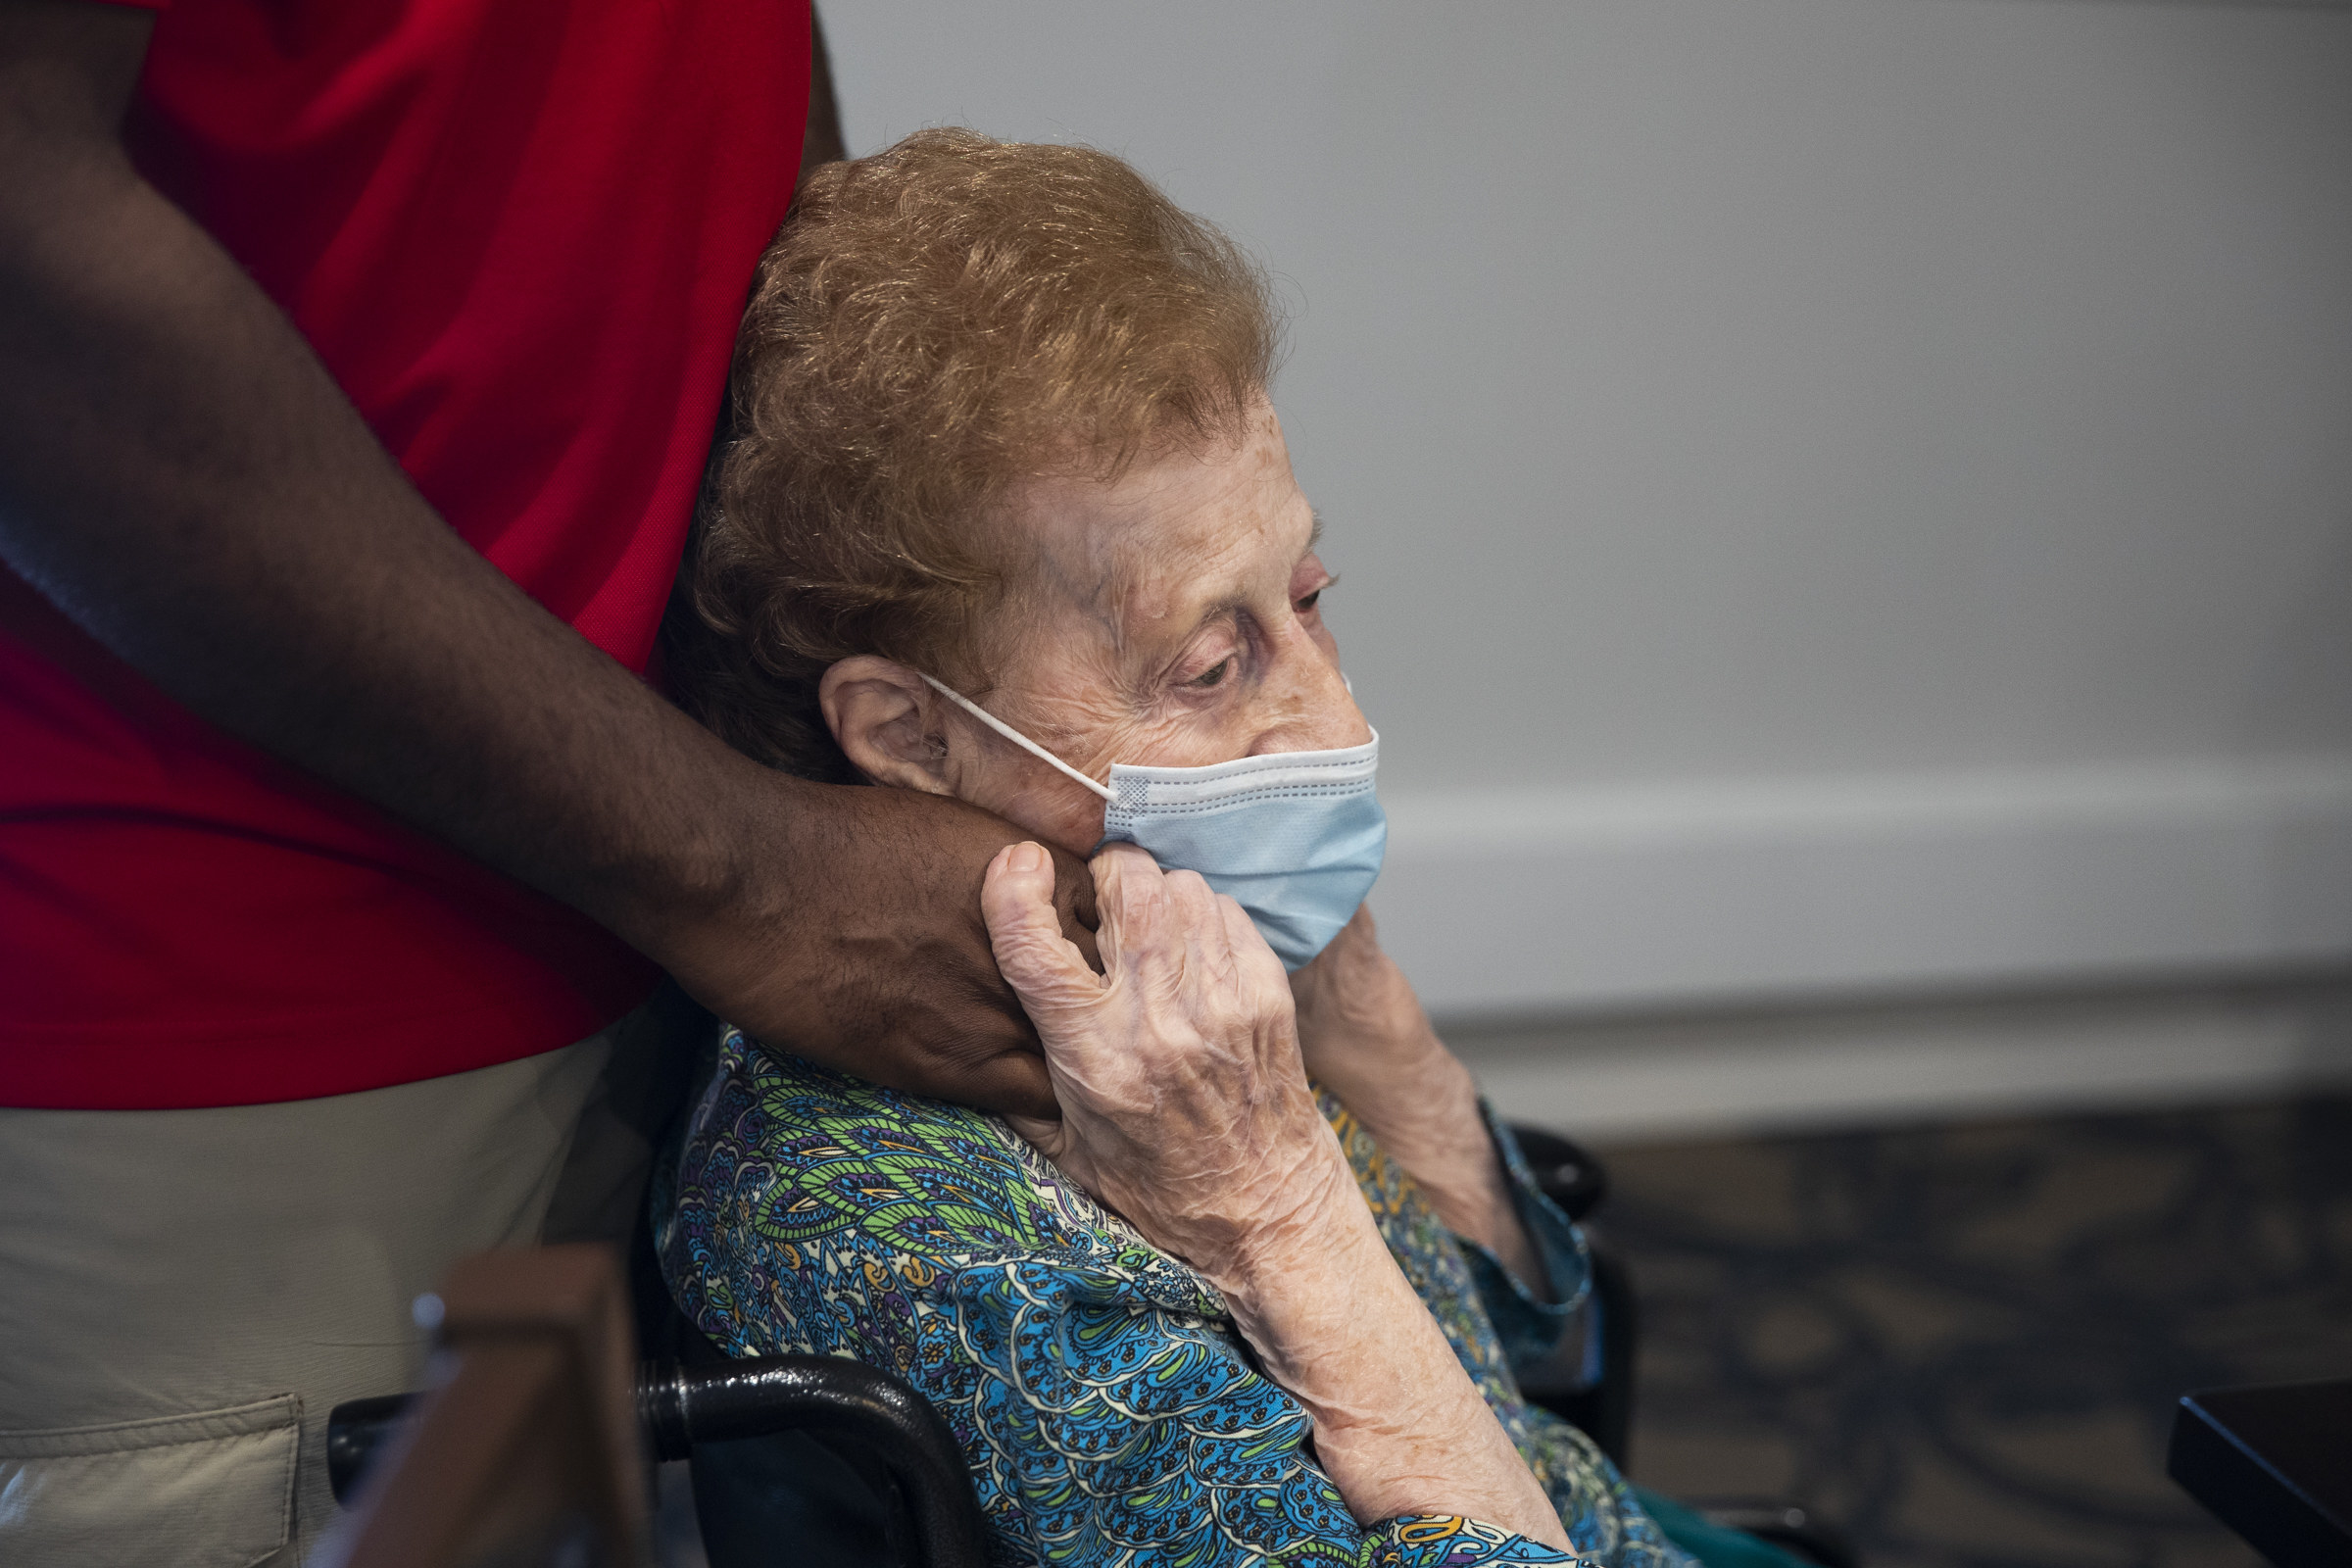 An older woman in a wheelchair grips the hands of a man standing behind her, she is wearing a mask